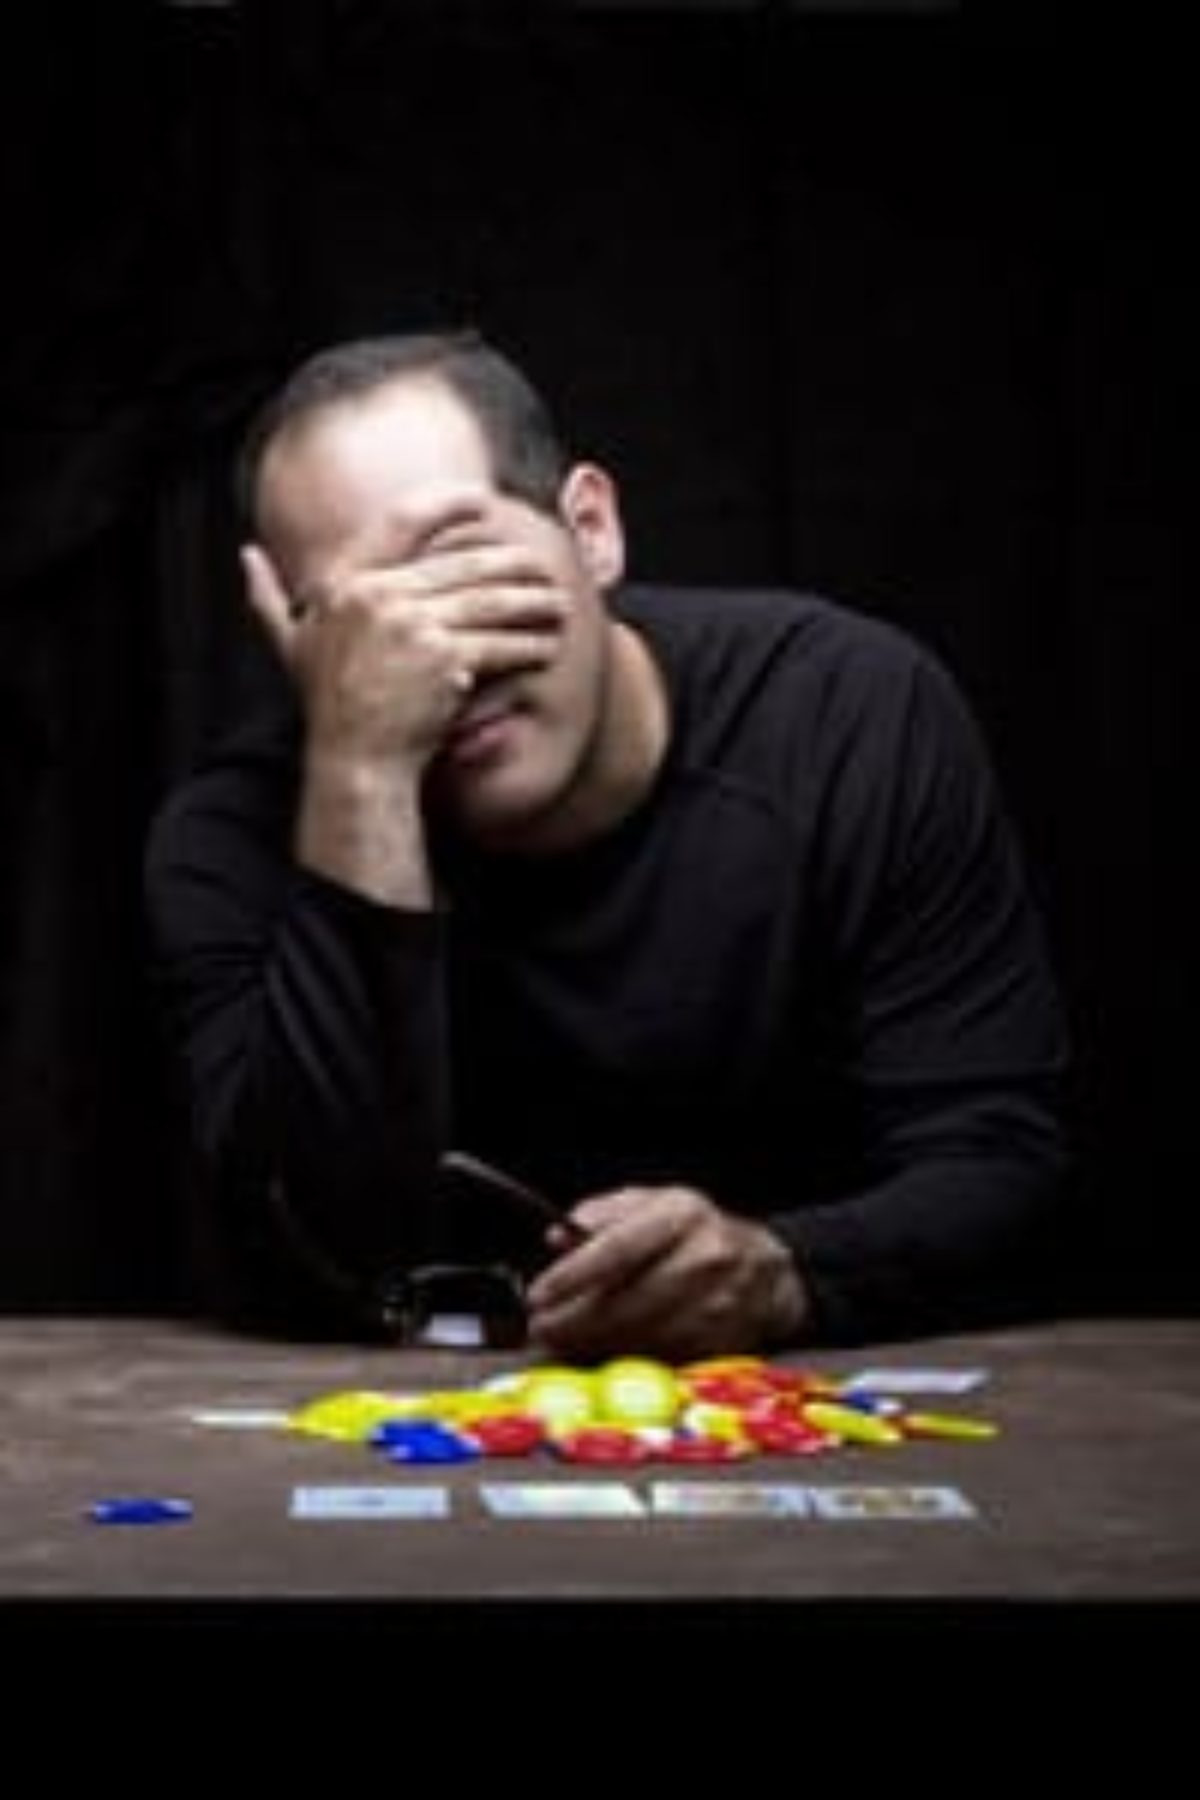 Gambling And Mental Health Issues